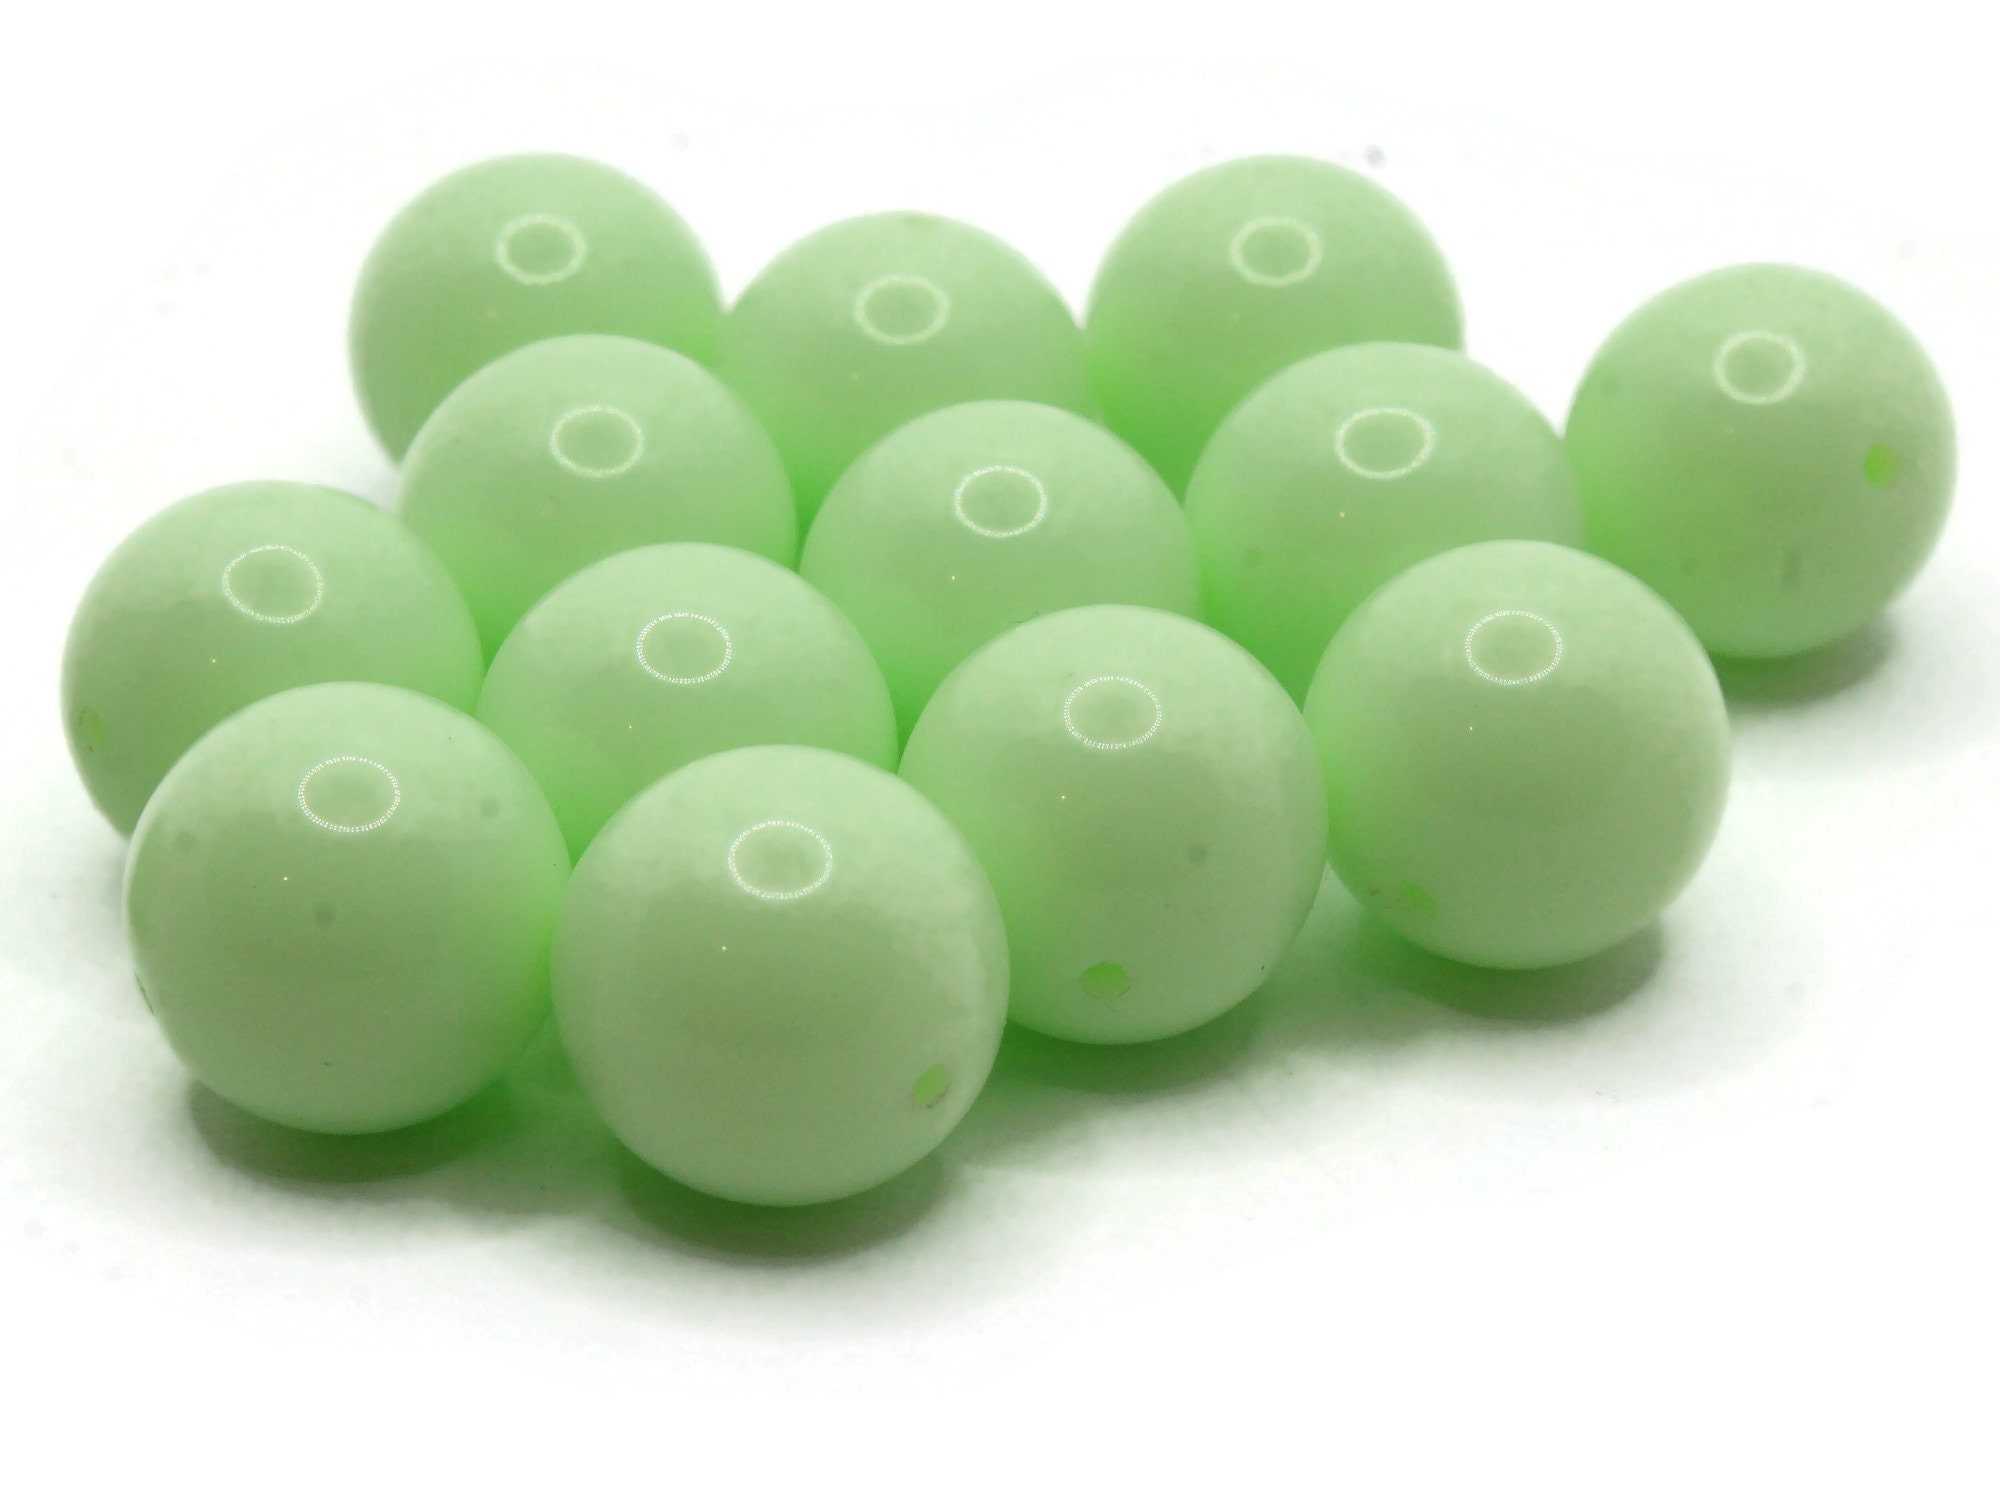 20mm Mint Green Lace Bubblegum Beads, Resin Gumball Beads in Bulk, 20mm  Beads, 20mm Bubble Gum Beads, 20mm Shiny Chunky Beads